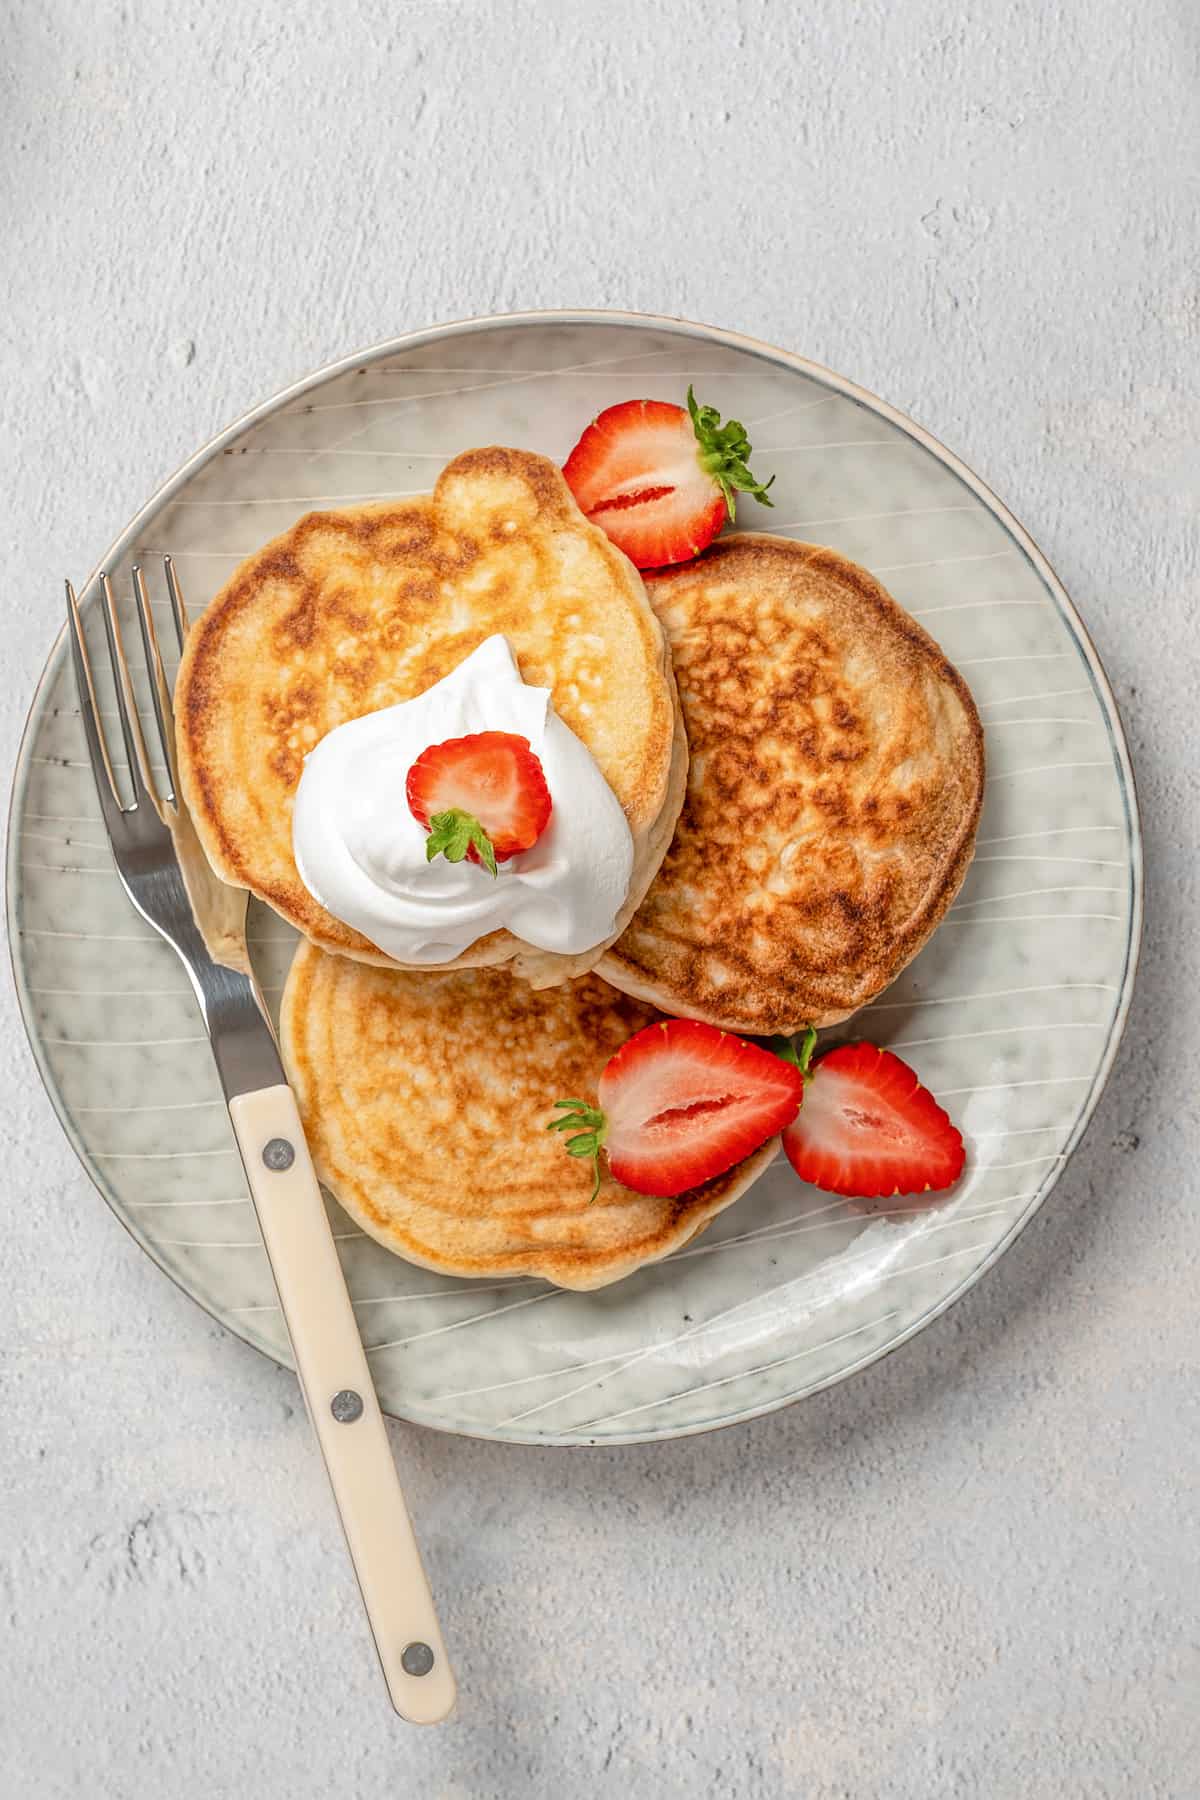 Overhead view of three gluten-free pikelets on a plate topped with whipped cream and strawberry slices.